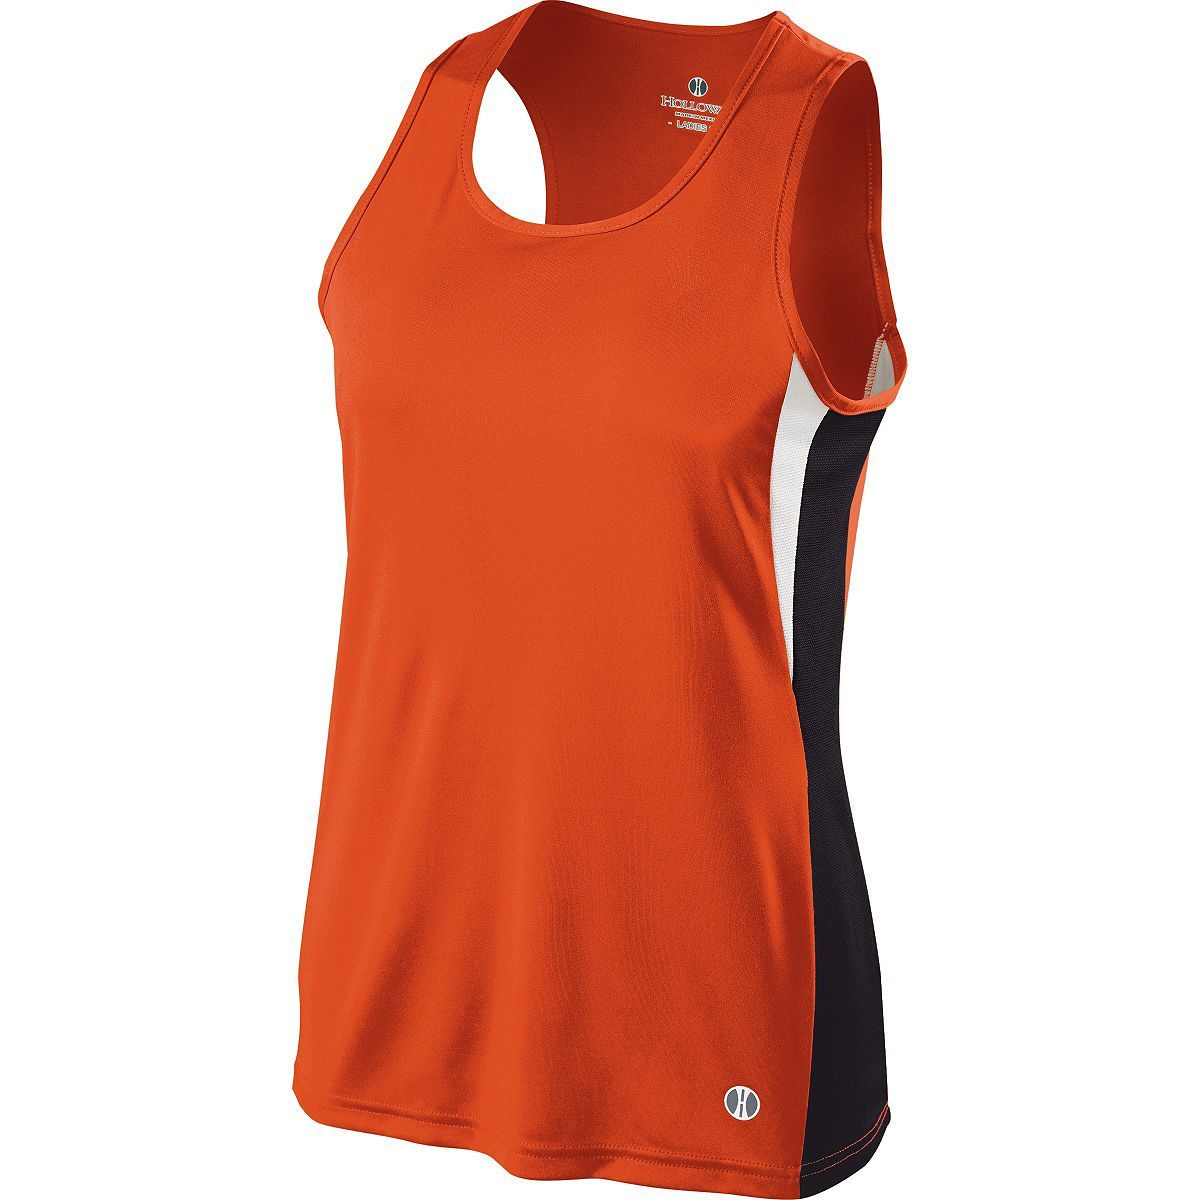 Holloway Ladies Vertical Singlet in Orange/Black/White  -Part of the Ladies, Track-Field, Holloway, Shirts product lines at KanaleyCreations.com